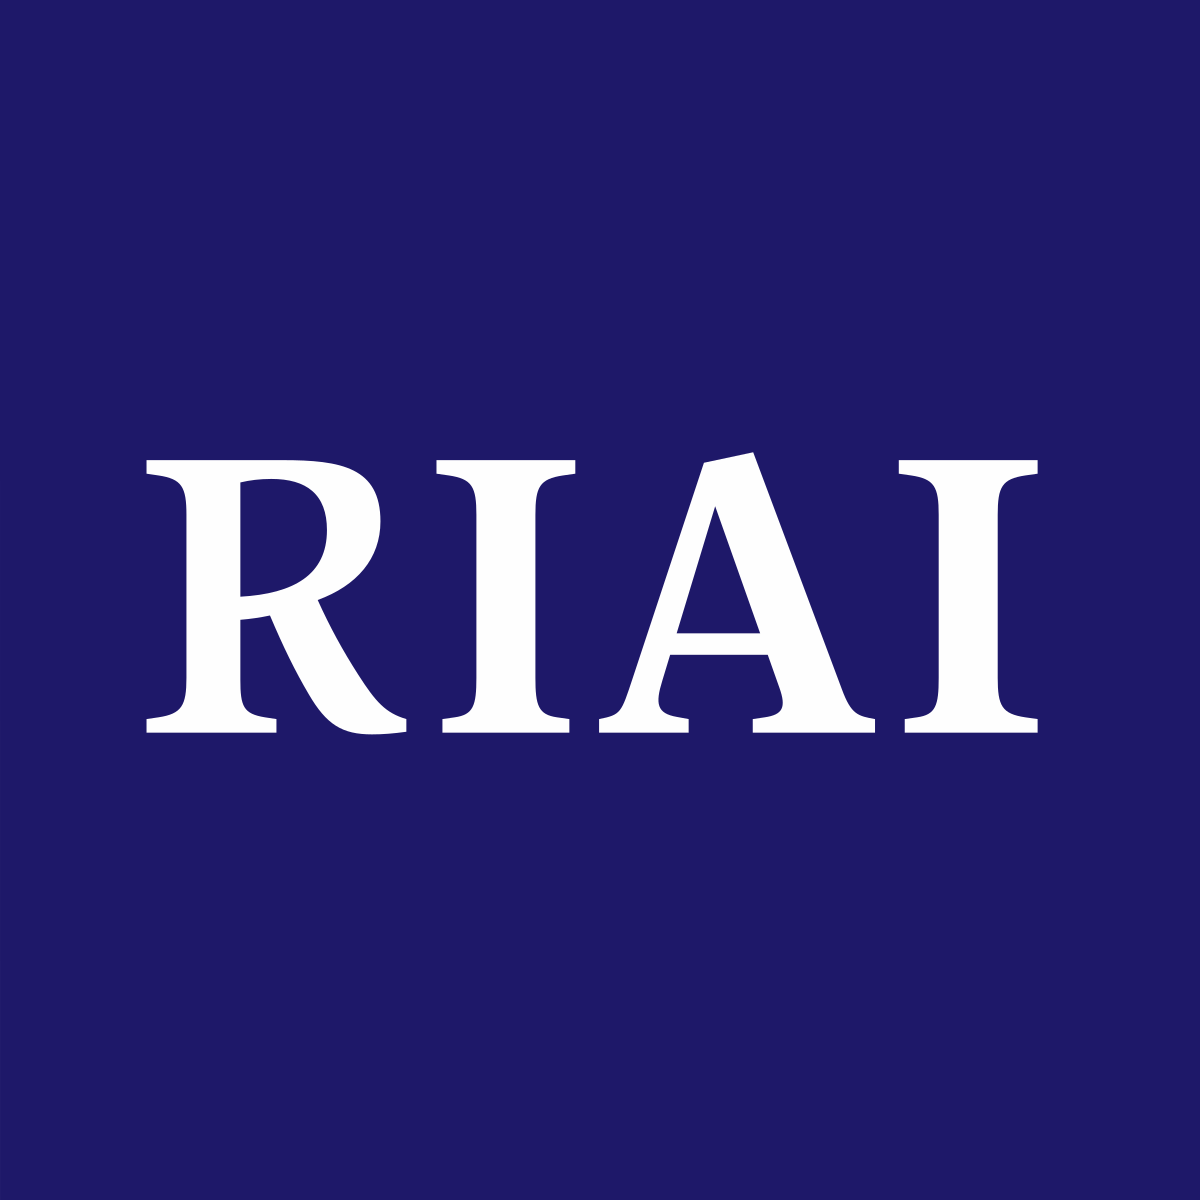 RIAI Building for All Award for 2020 and 2021